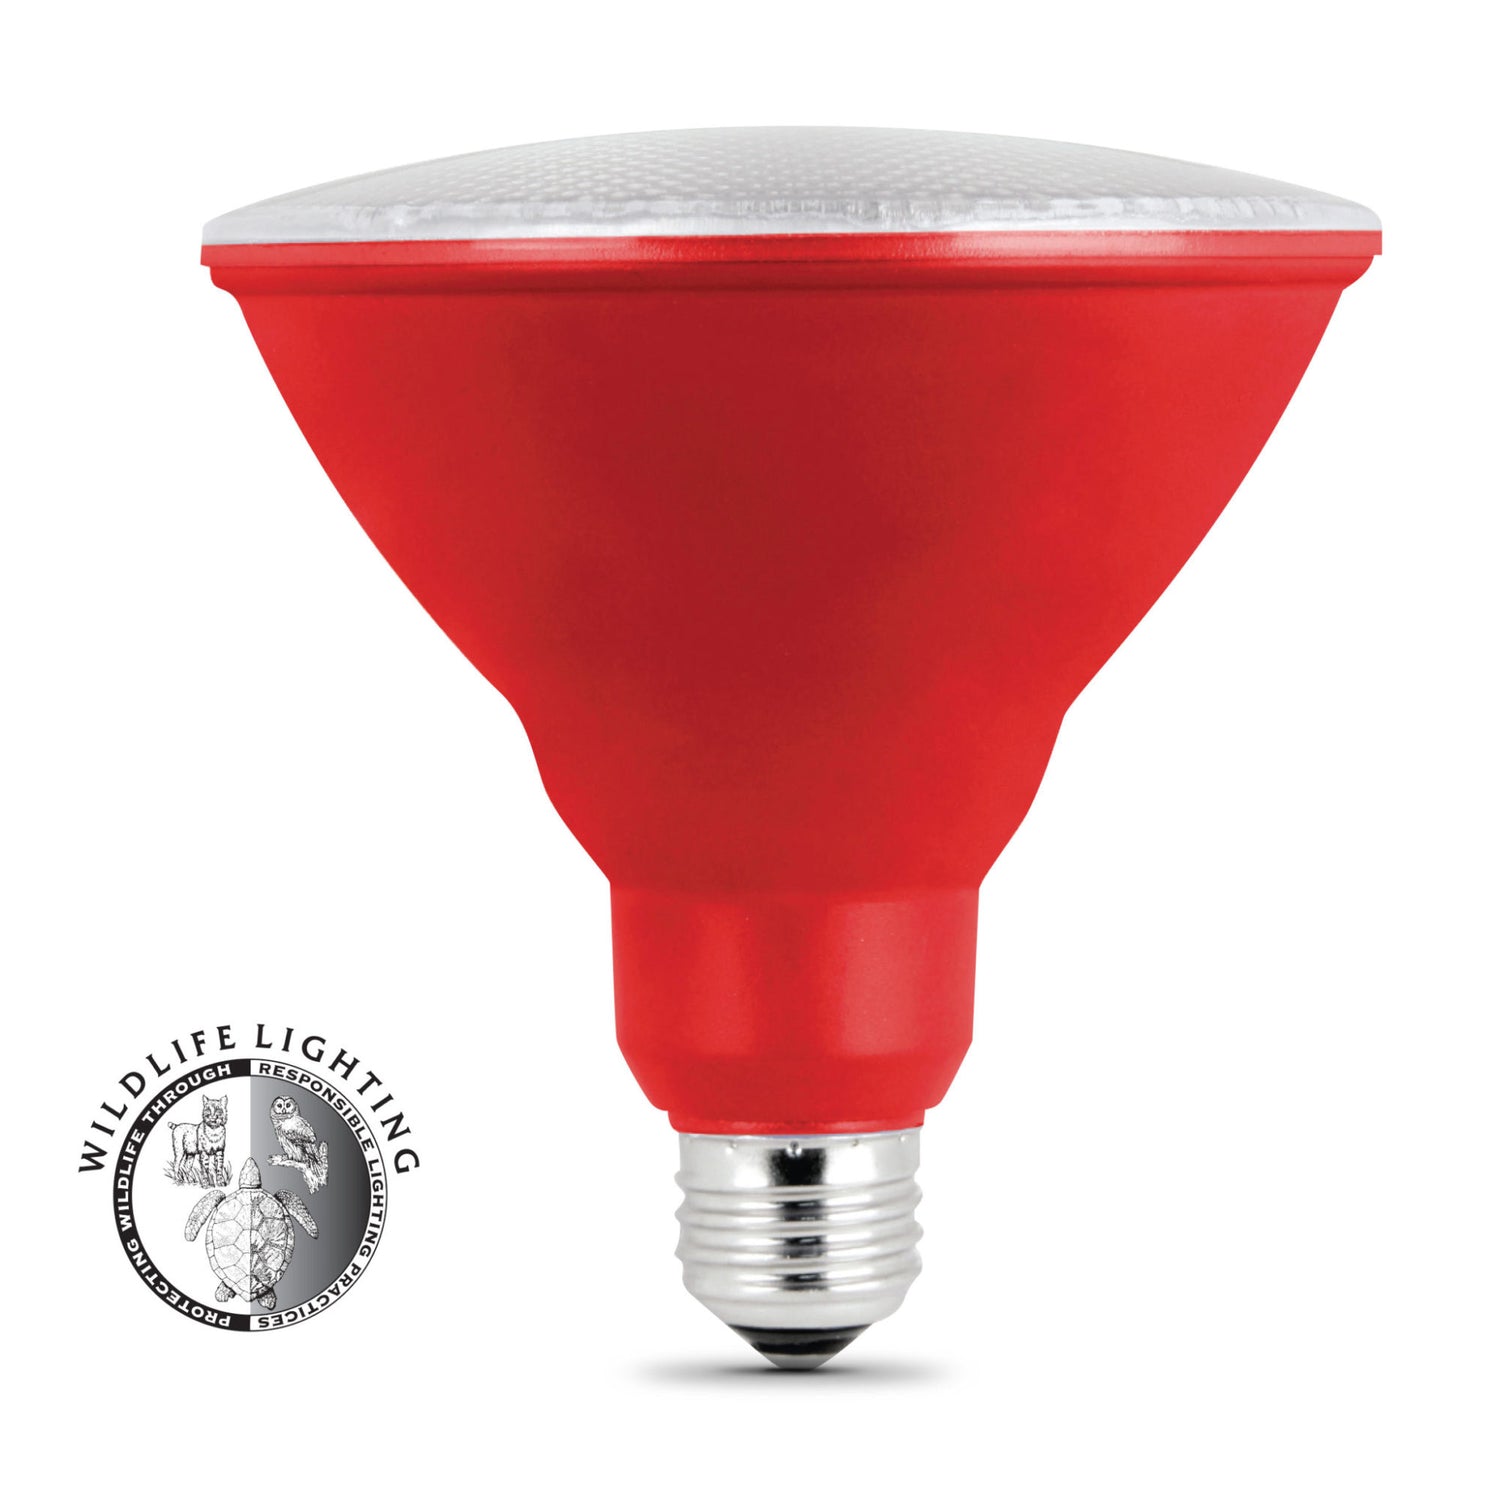 Red PAR38 Non-Dimmable LED Reflector Light Bulb (24-Pack)